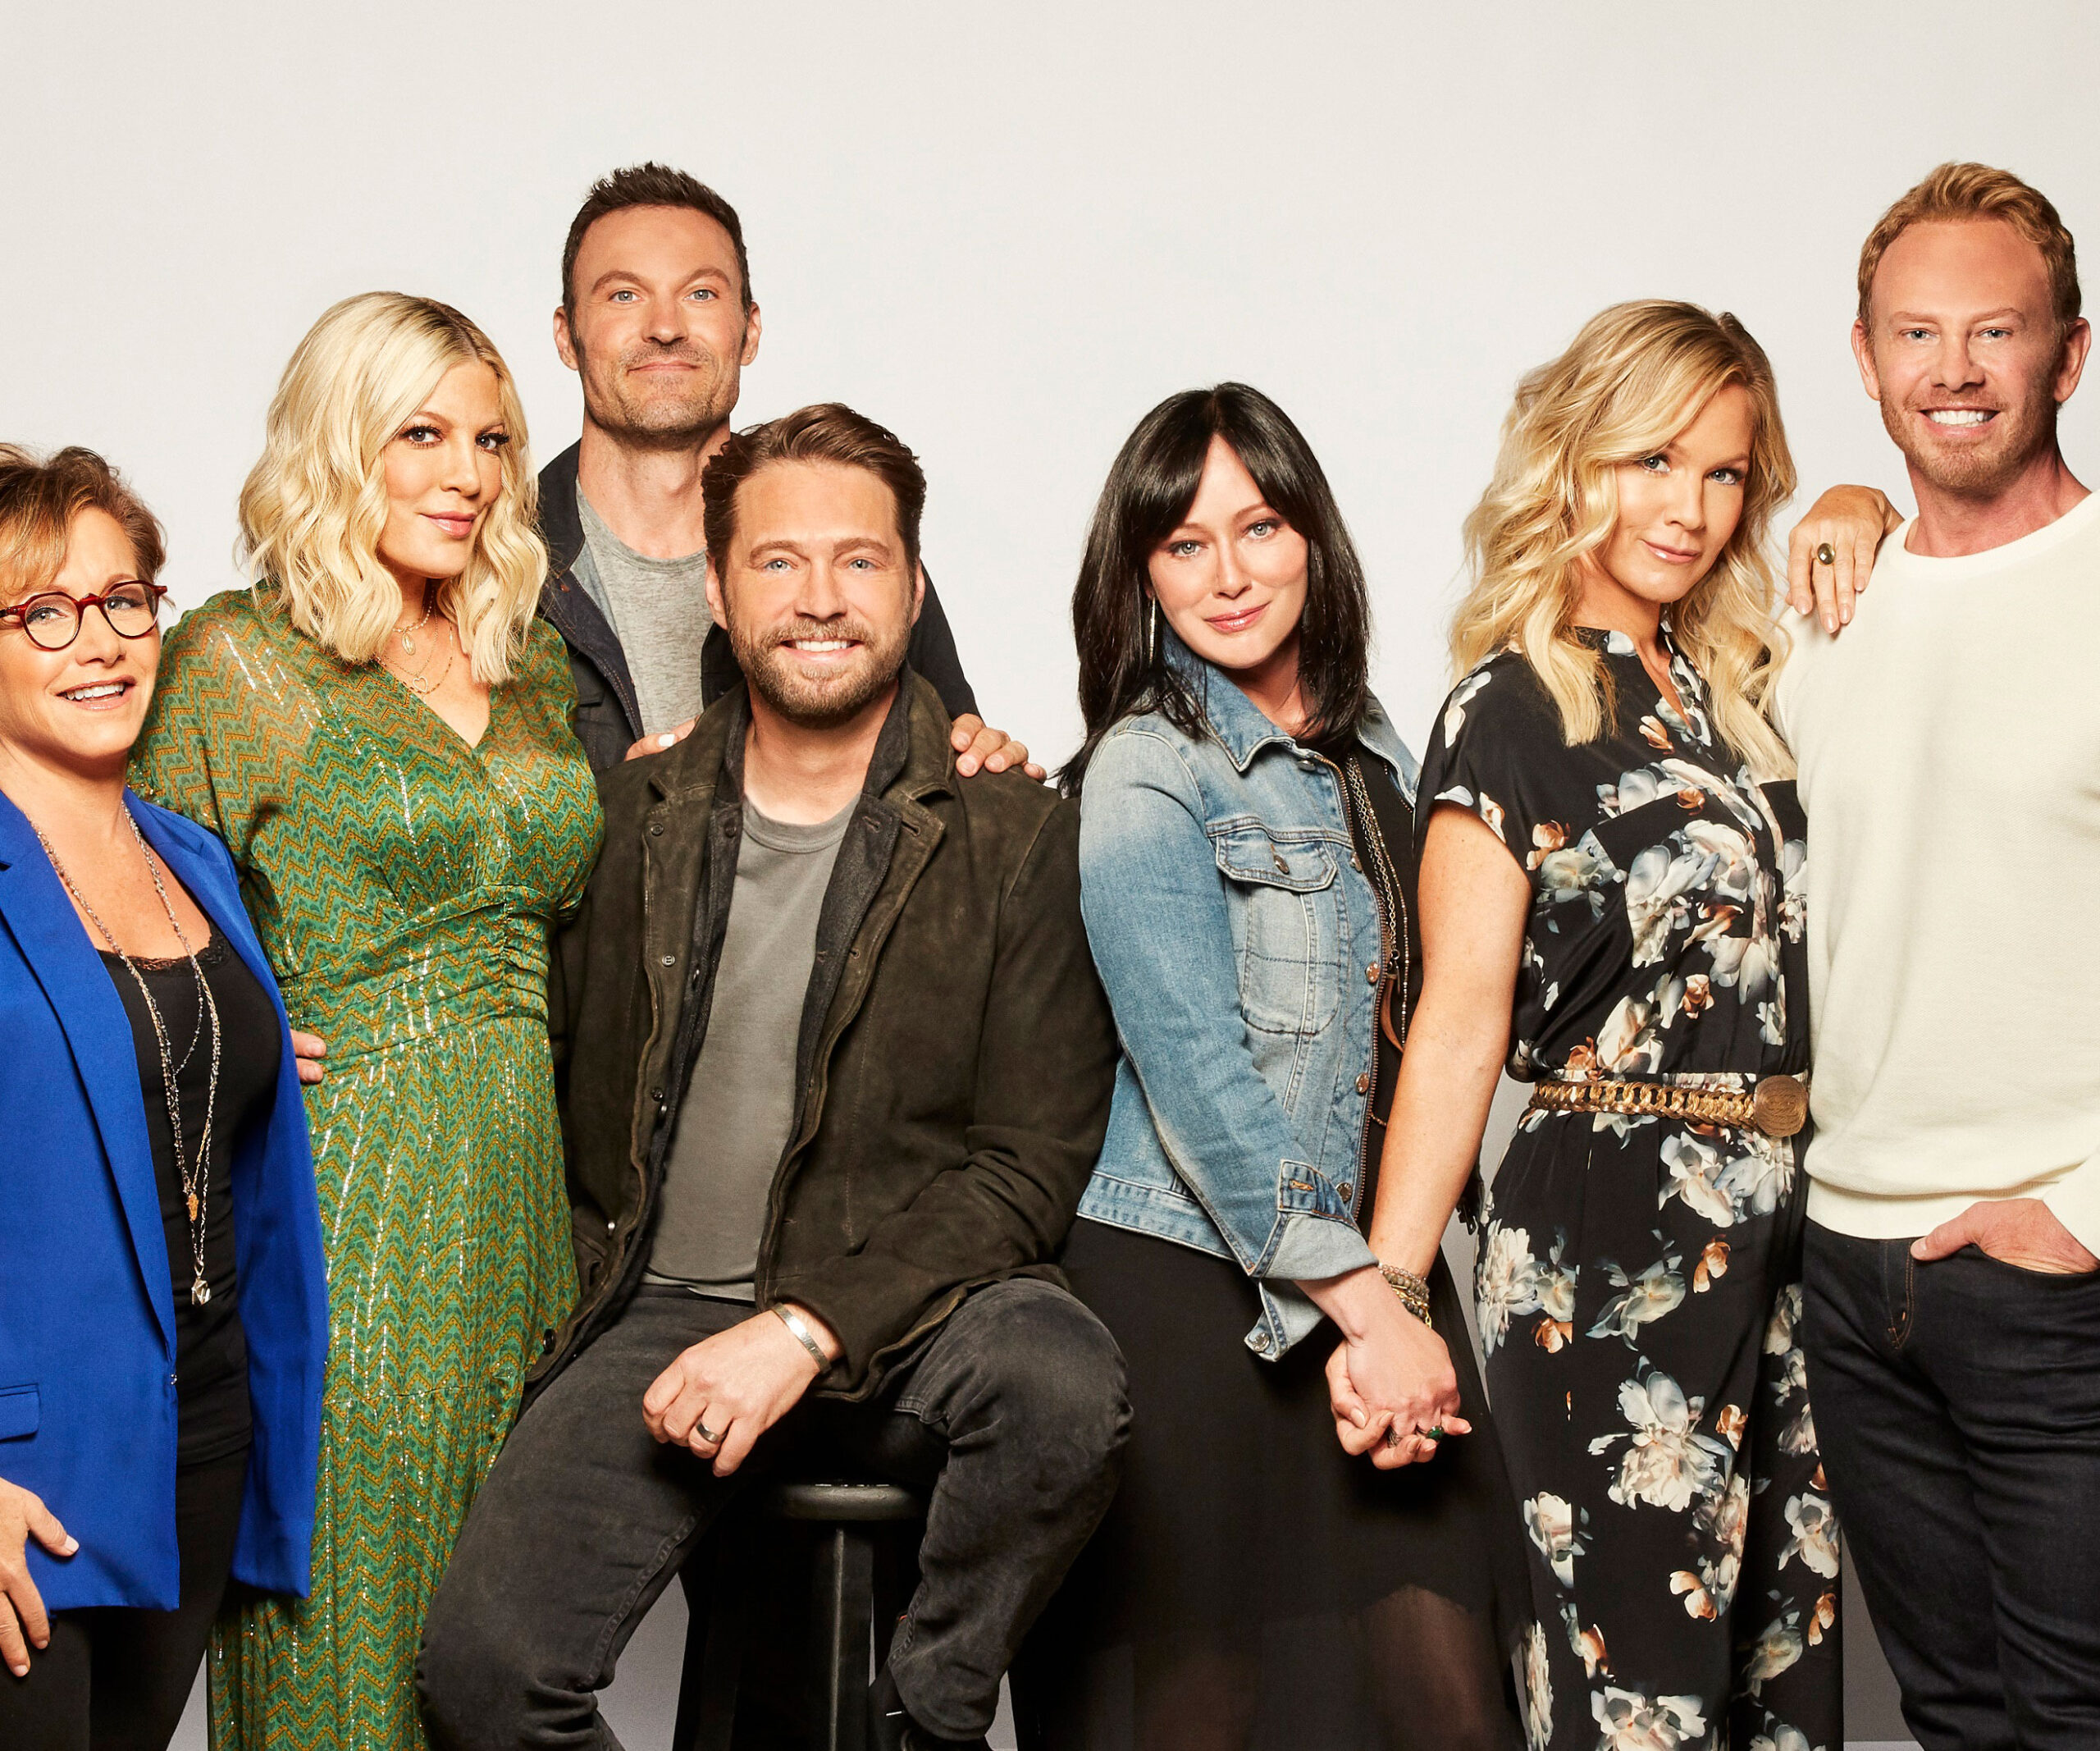 The Beverly Hills, 90210 reboot is funny, nostalgic and entertaining – with a whopper of a twist